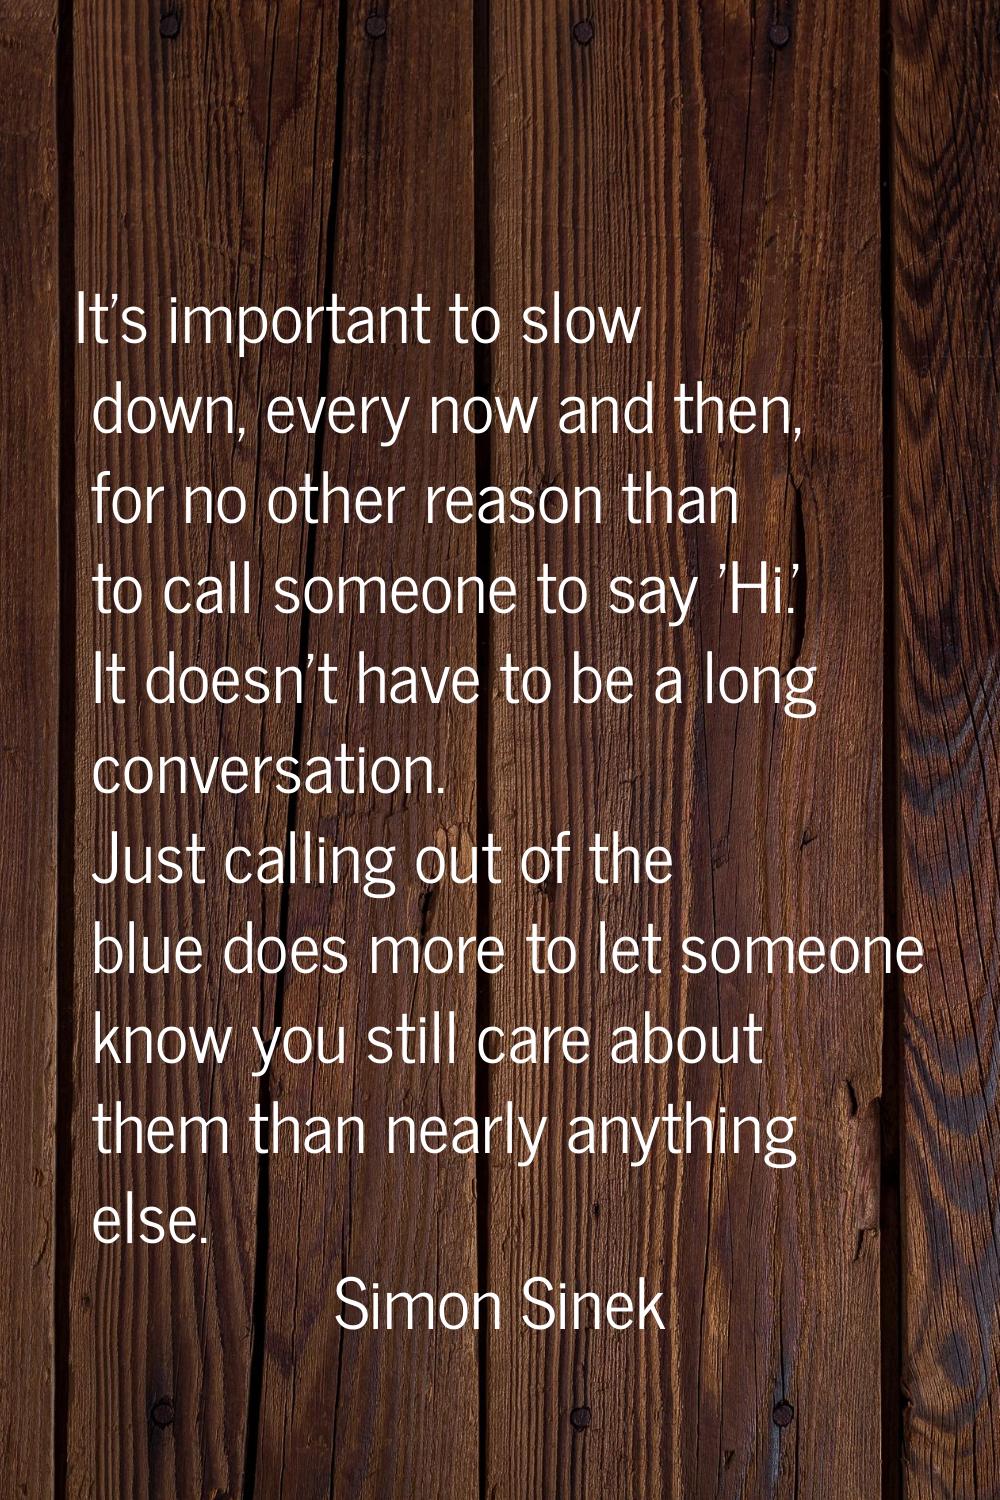 It's important to slow down, every now and then, for no other reason than to call someone to say 'H